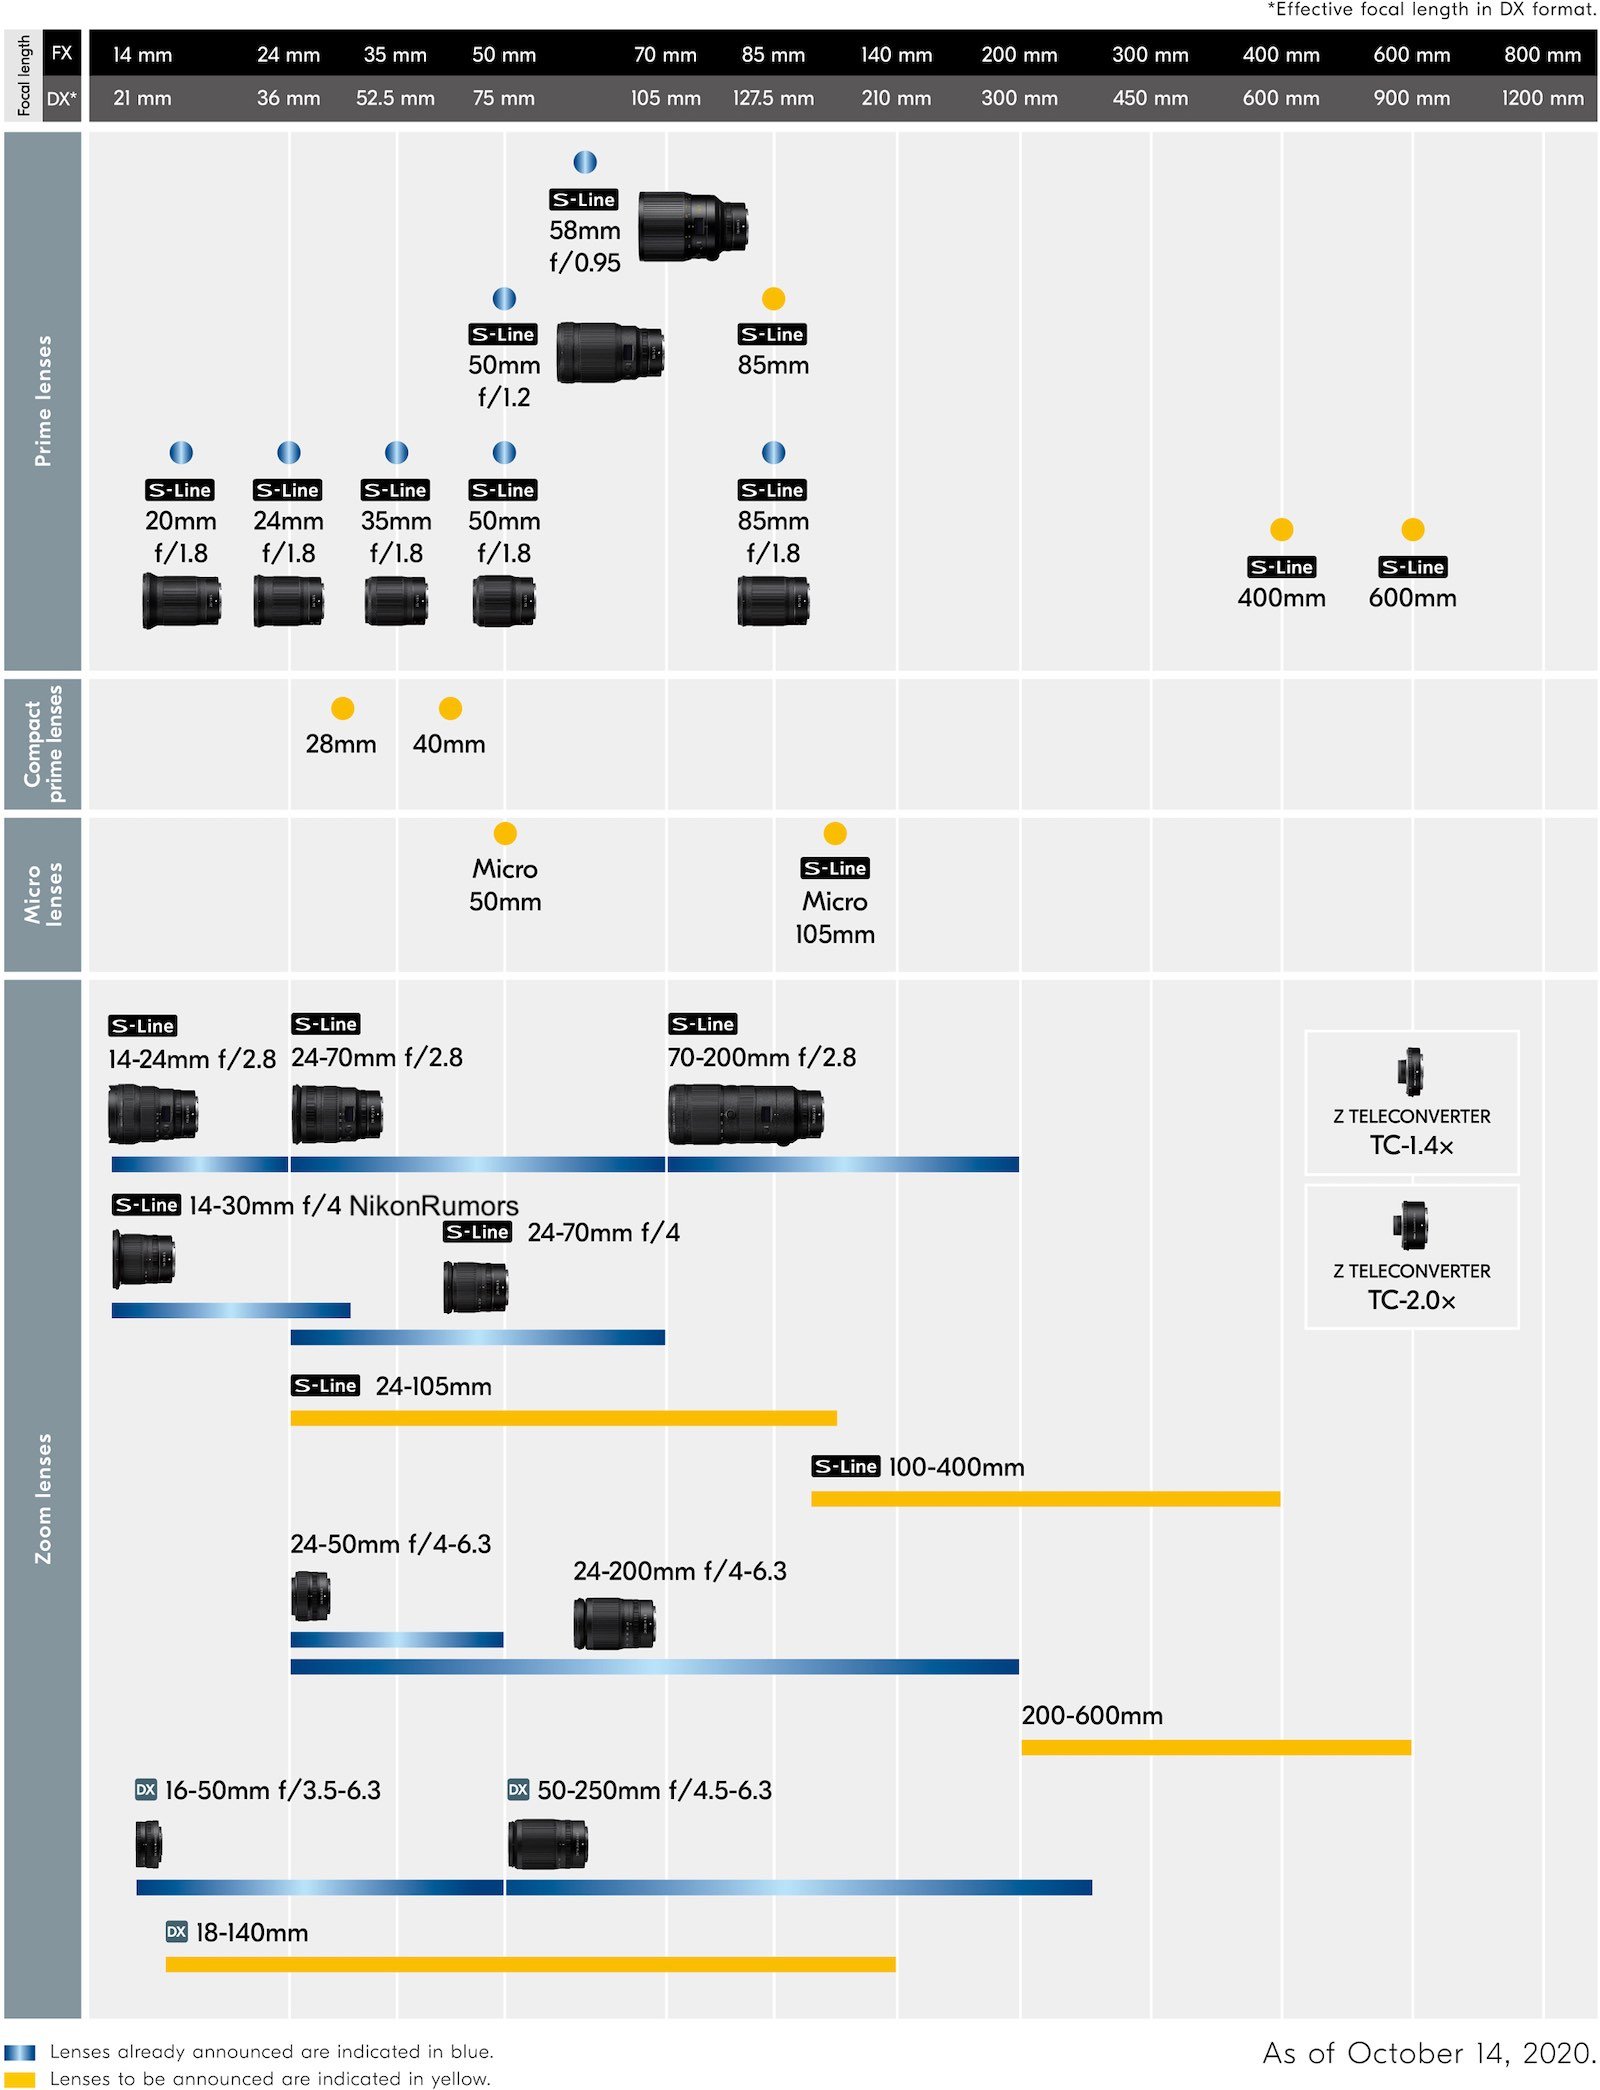 Nikon Updates Z Lens Roadmap, Adds 85mm, 400mm and 600mm Primes Top